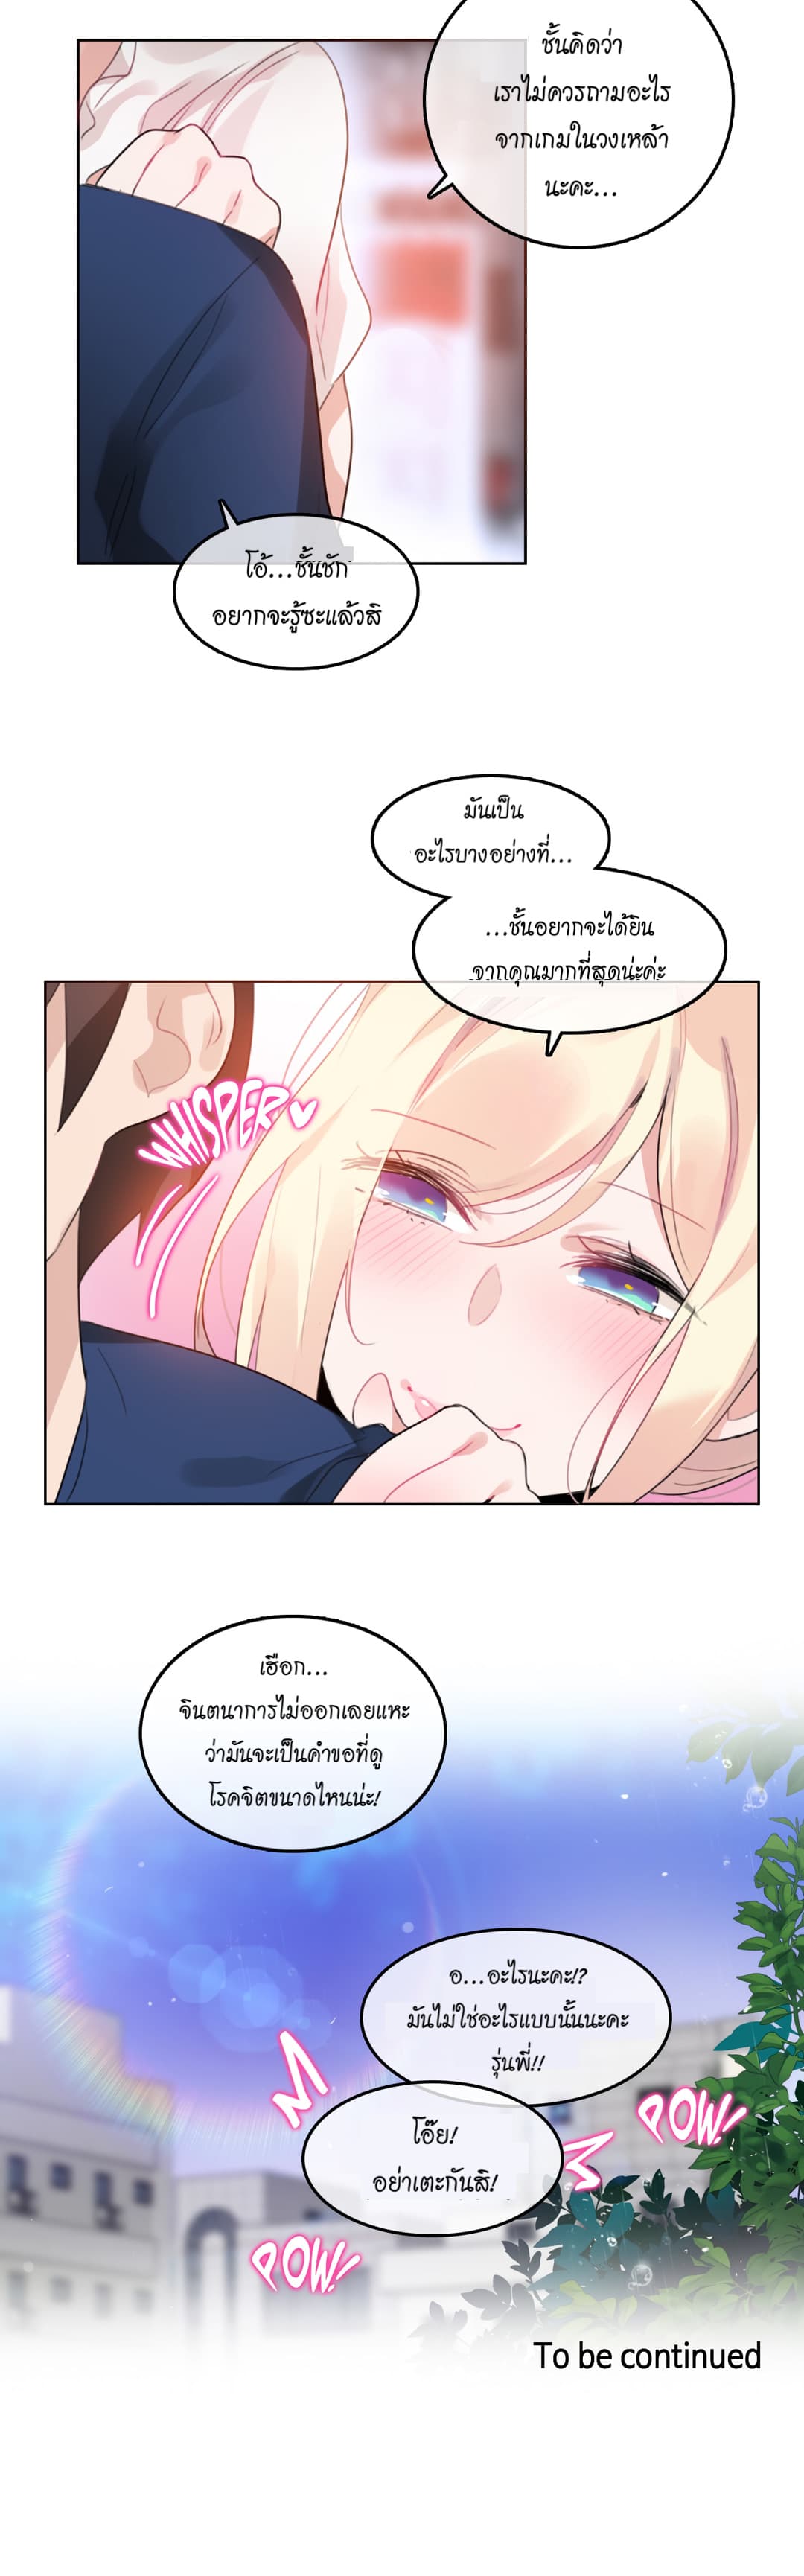 A Pervert’s Daily Life 36 (24)